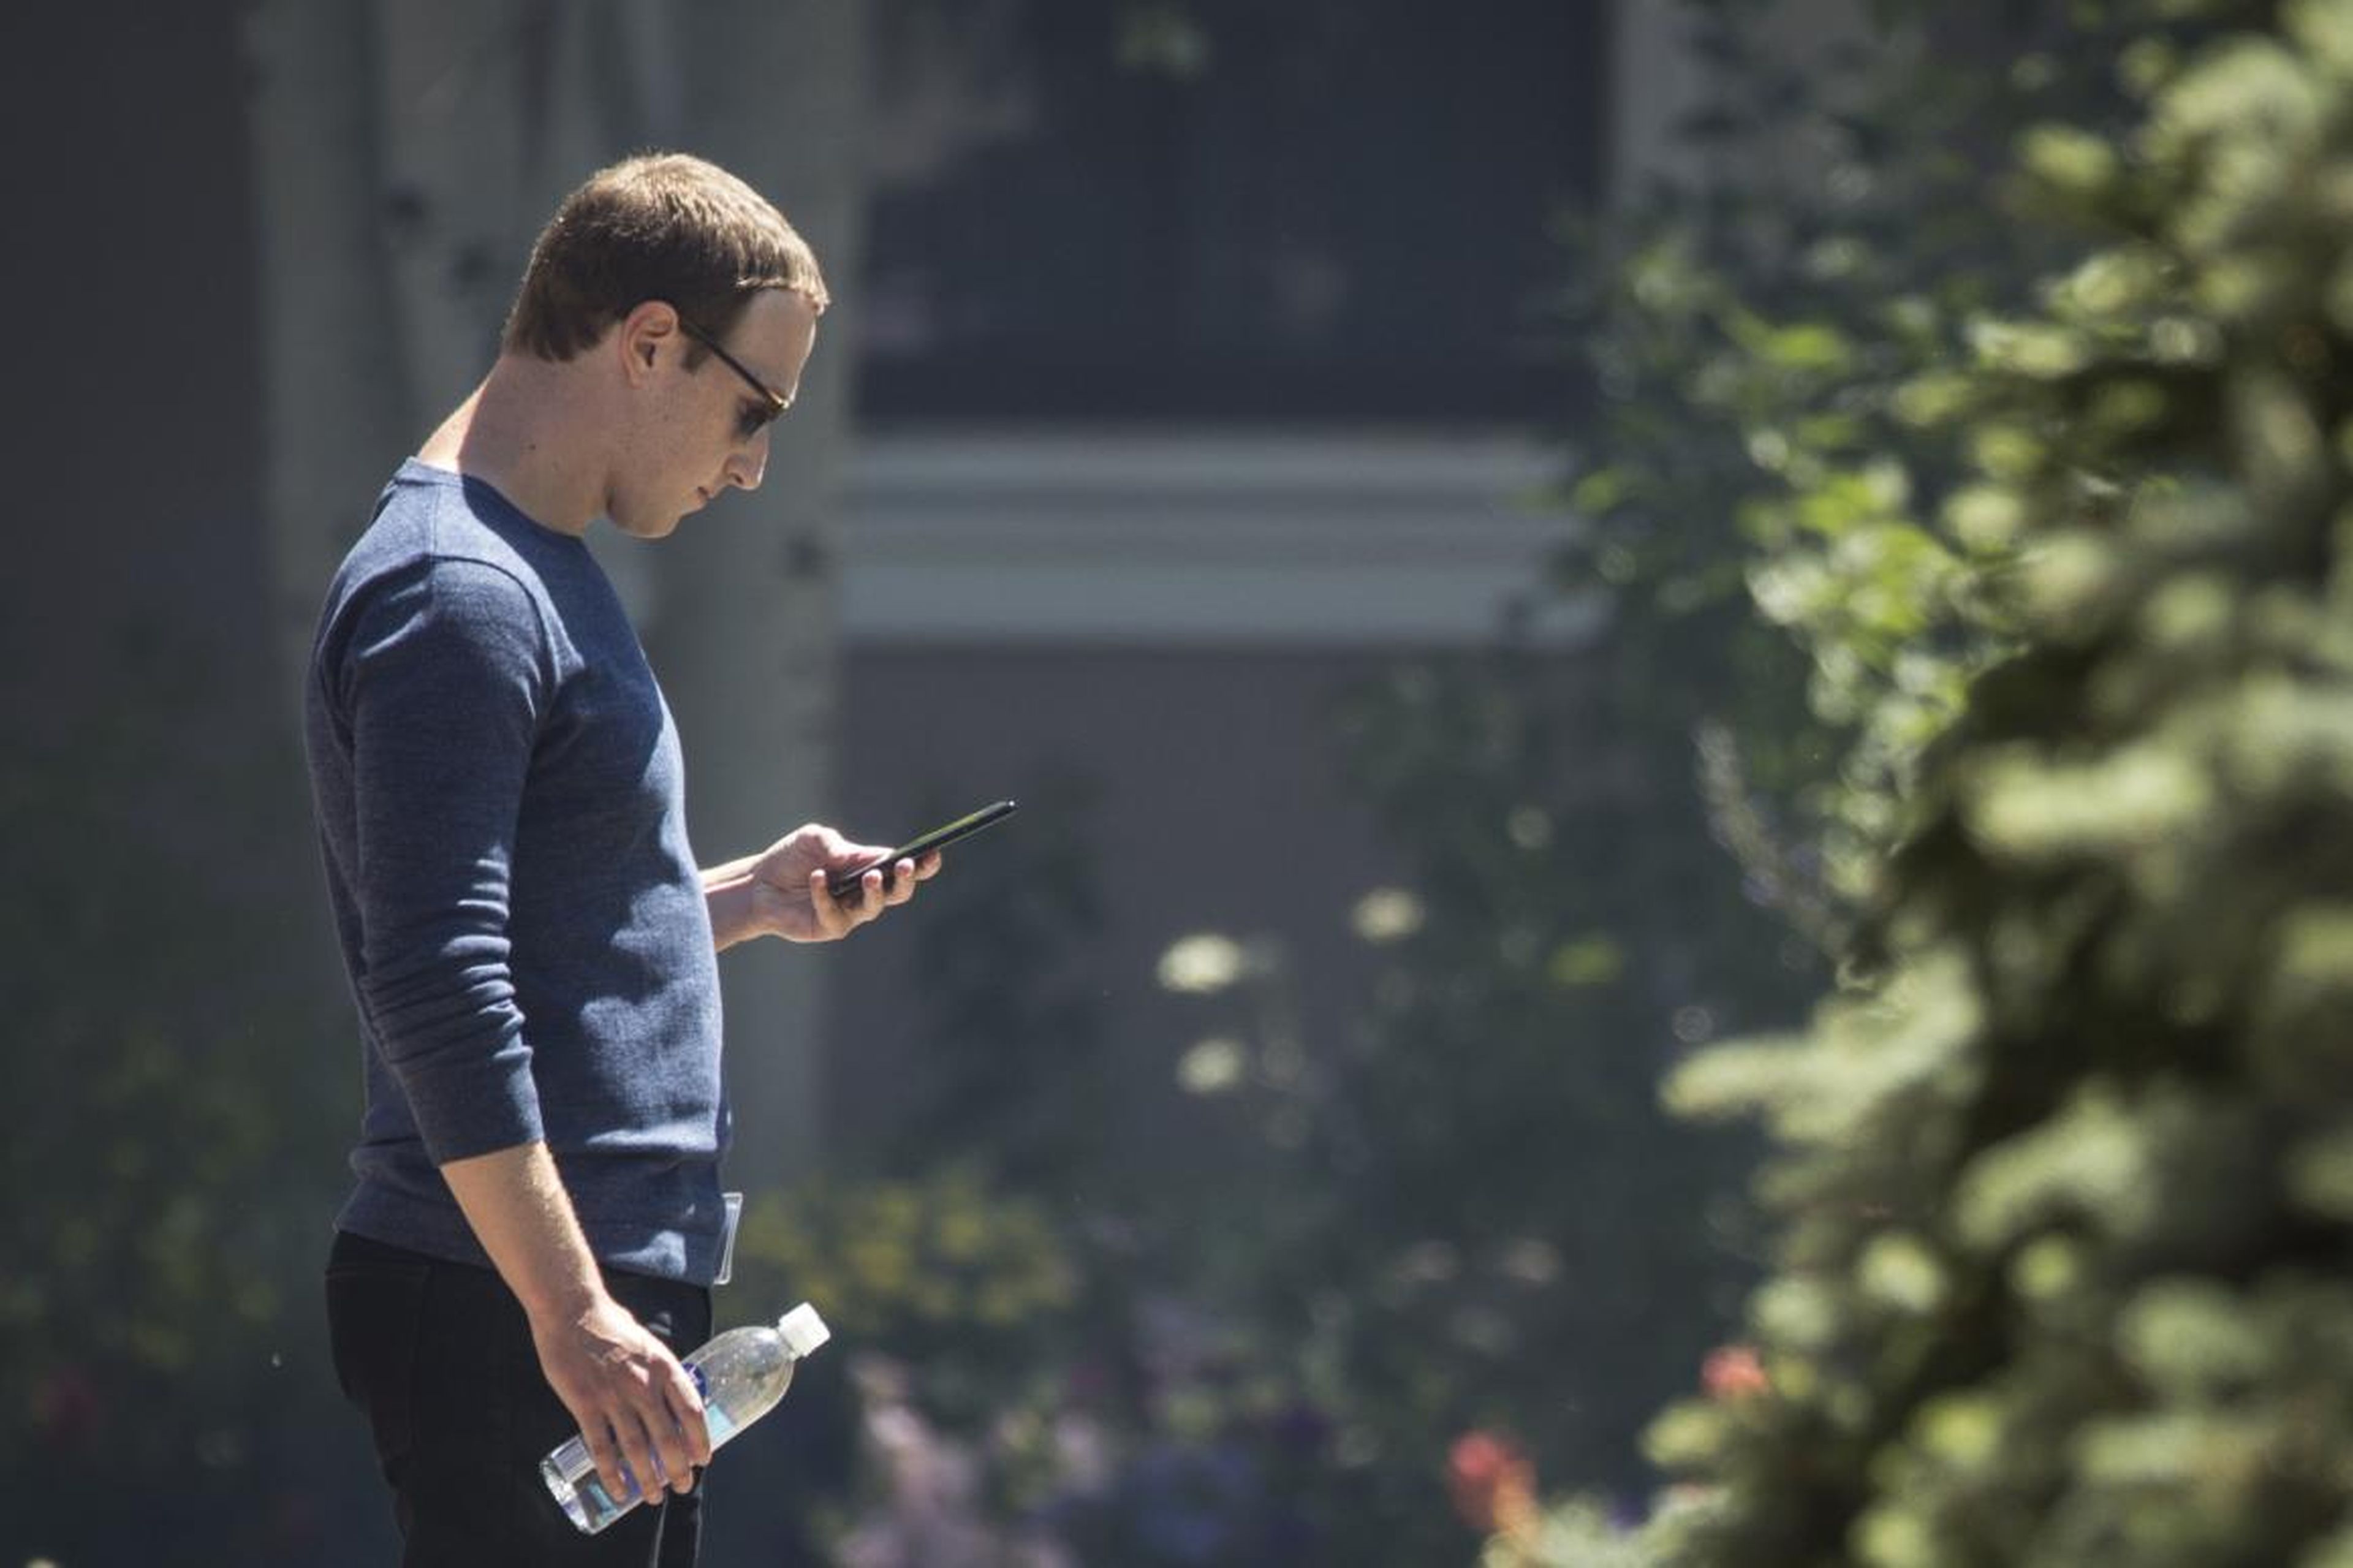 There's a wildly popular conspiracy theory that Facebook listens to your private phone calls, and no matter what the tech giant says, people just aren't convinced it's not true